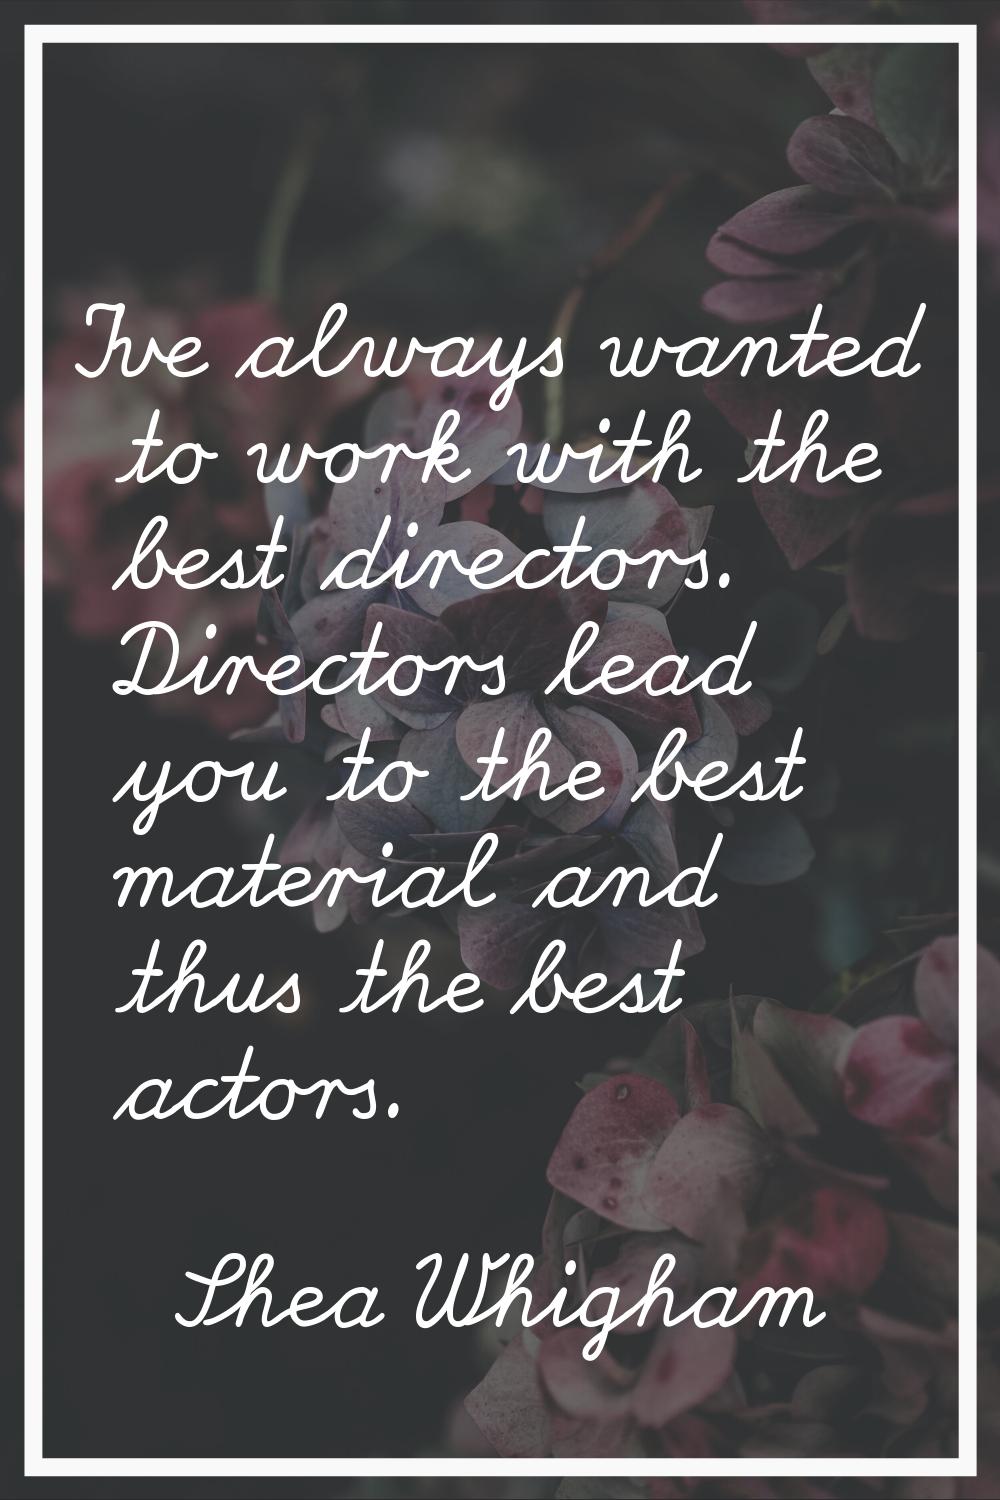 I've always wanted to work with the best directors. Directors lead you to the best material and thu